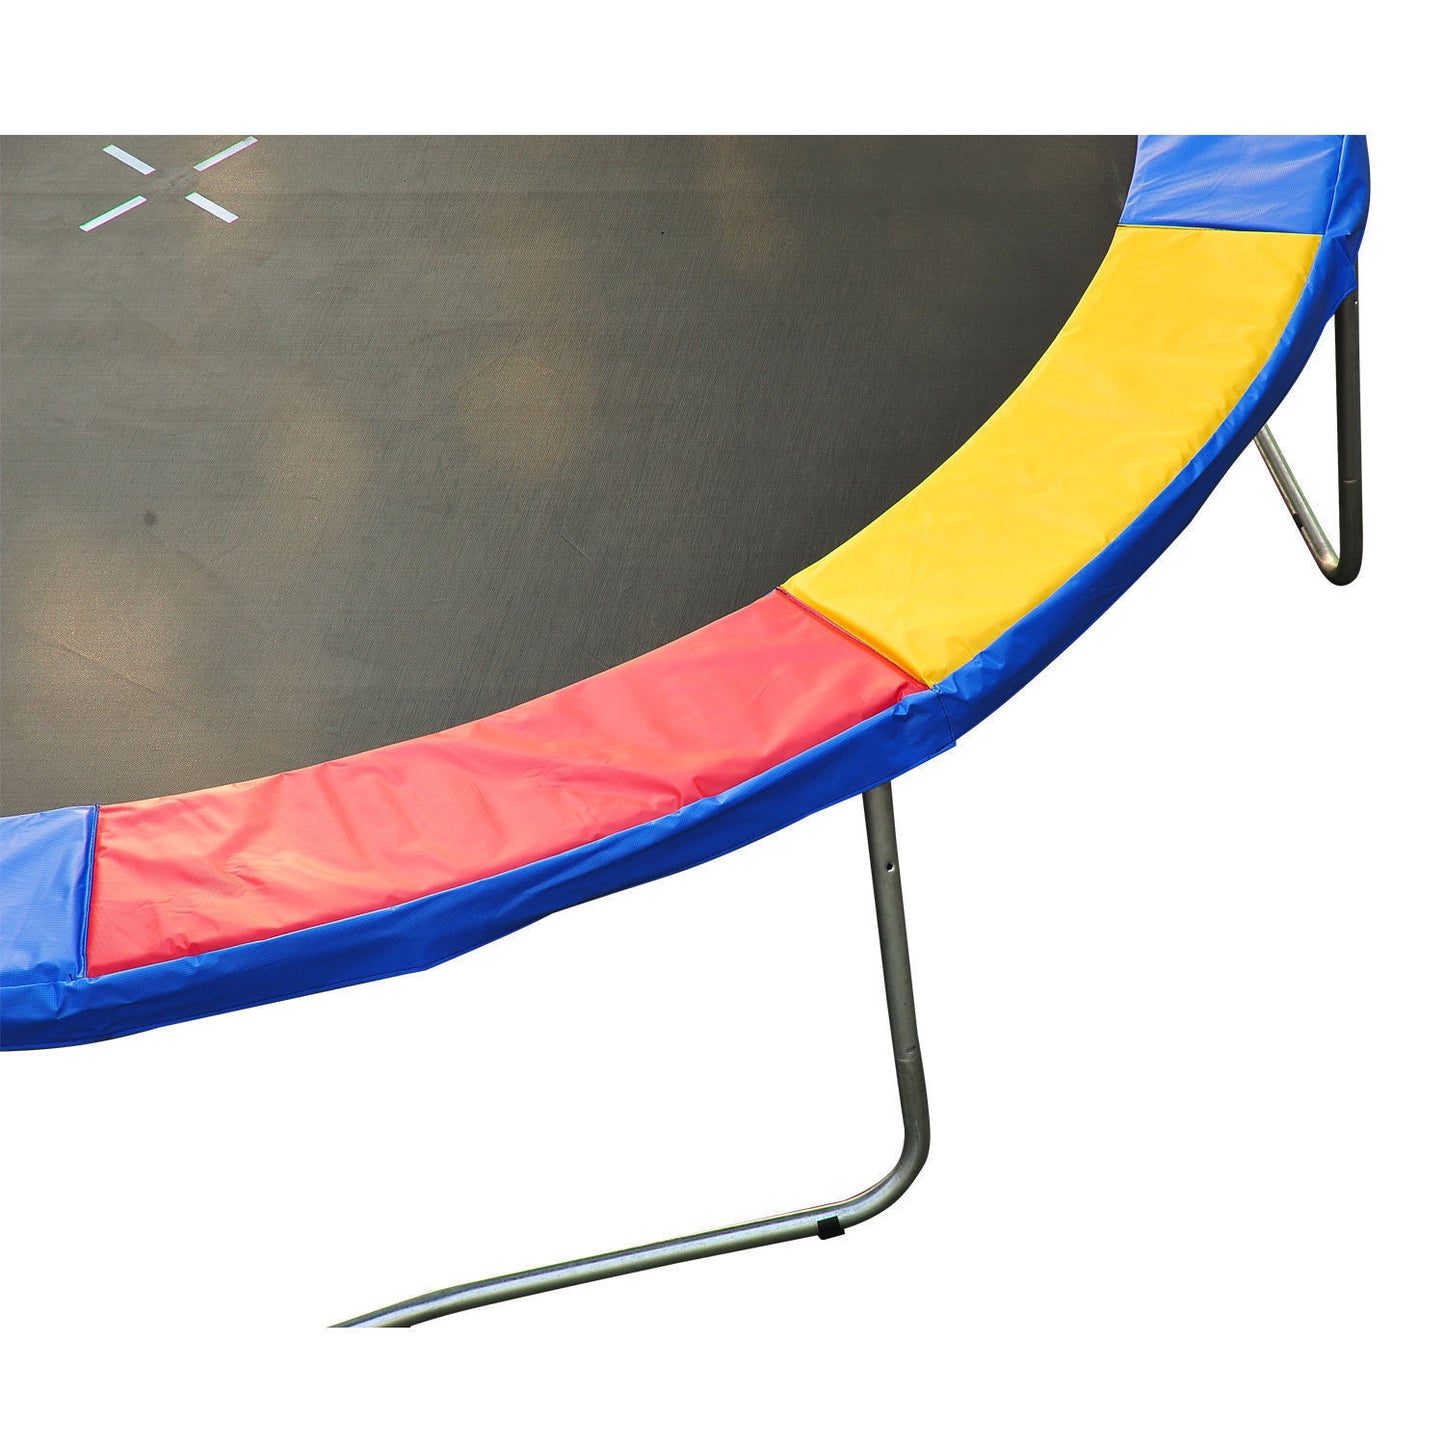 Nancy's Union Hall Trampoline safety edge - Cover - Red, Blue - 244cm